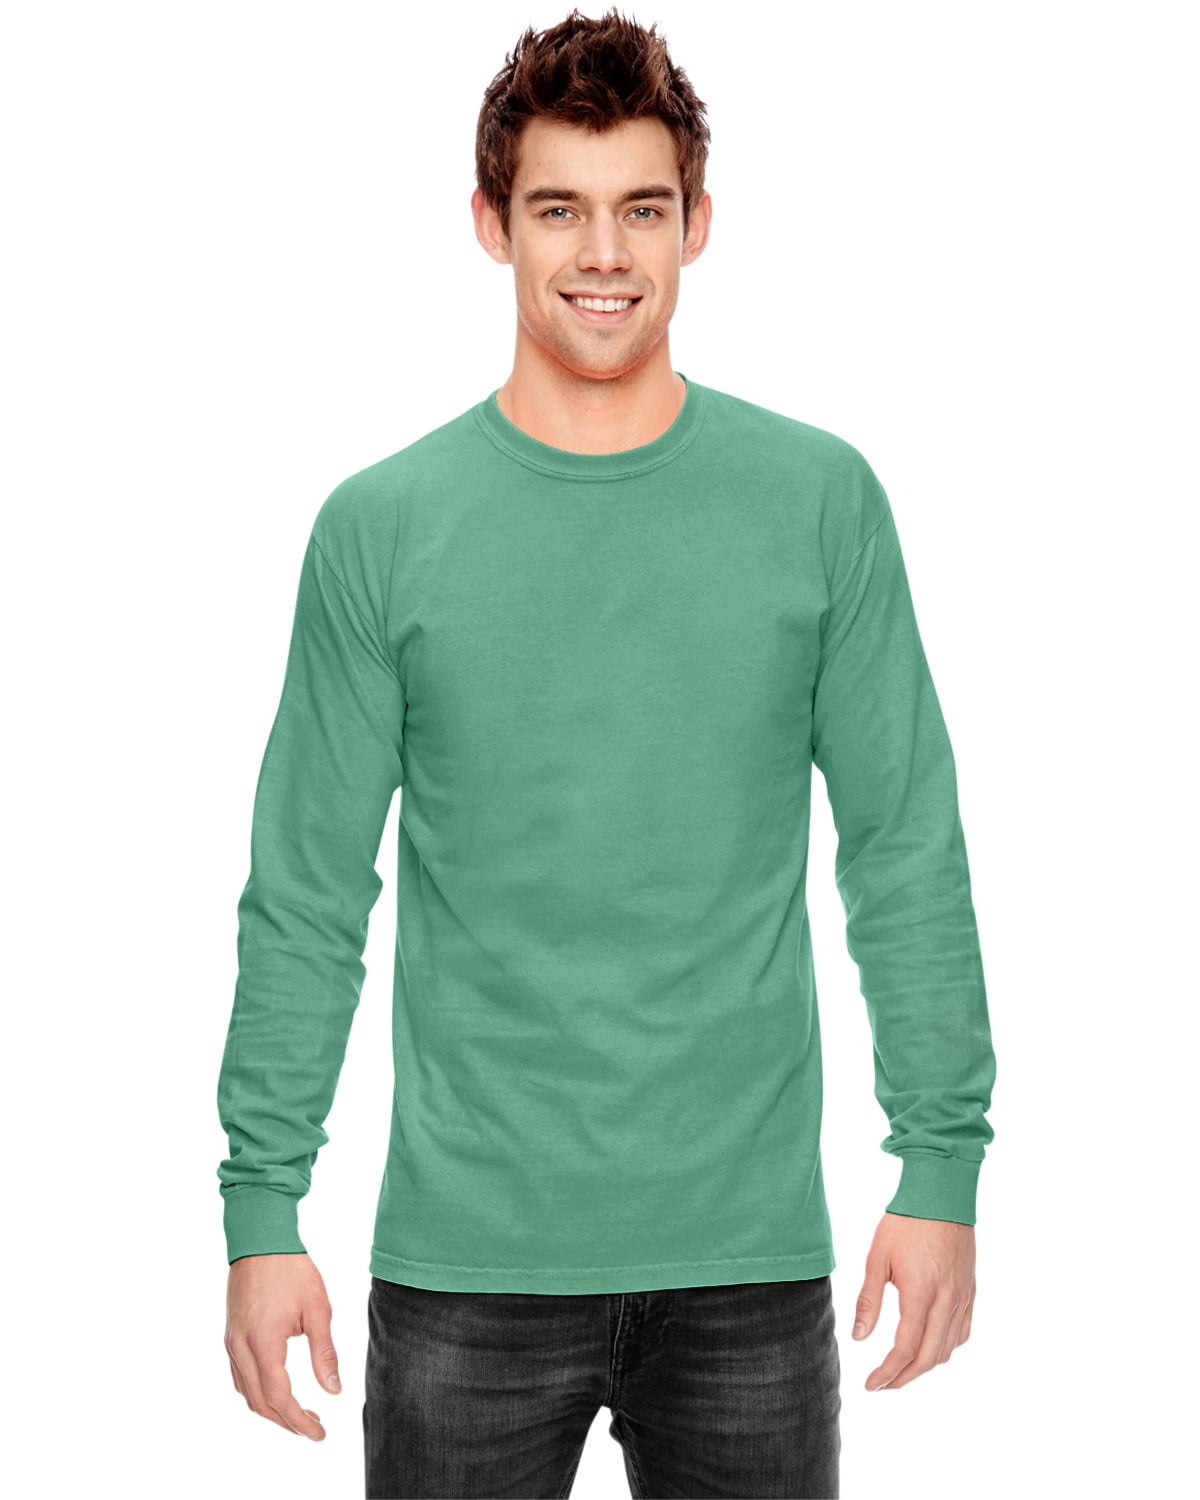 COMFORT COLORS - The Comfort Colors Adult Heavyweight RS Long-Sleeve T ...